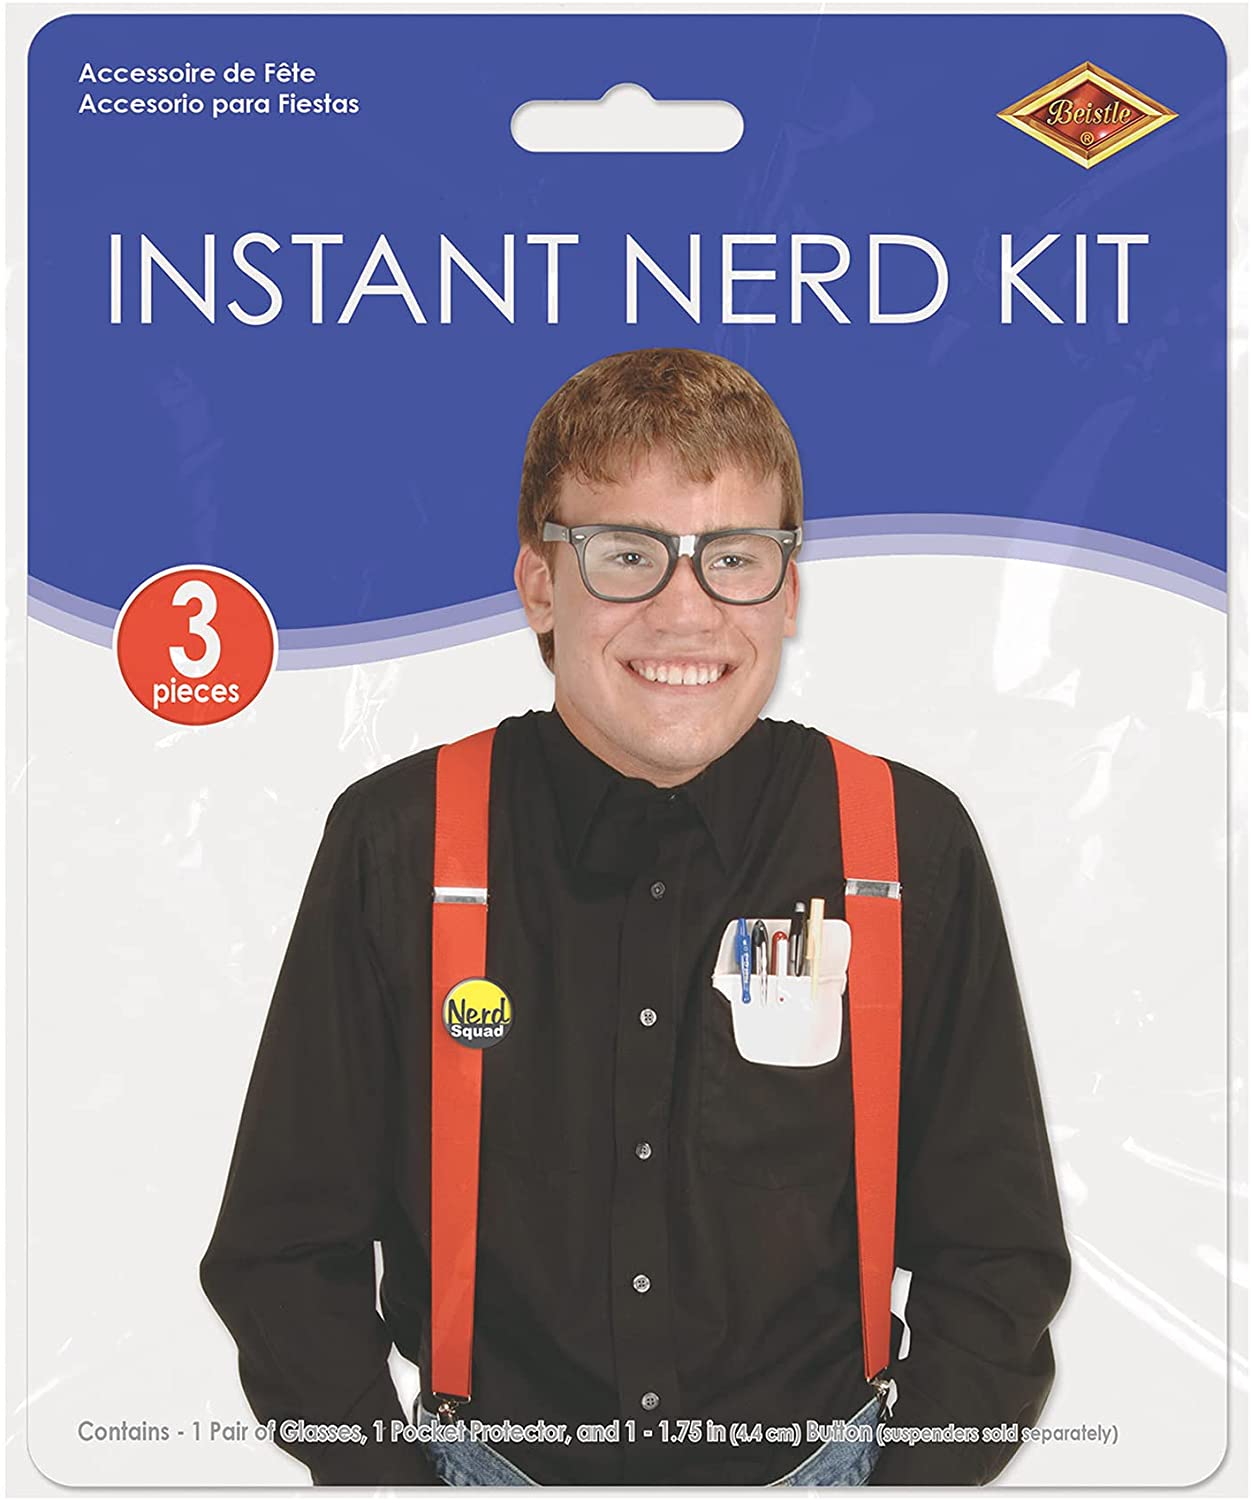 a young white male with suspenders and glasses introduces an instant nerd kit